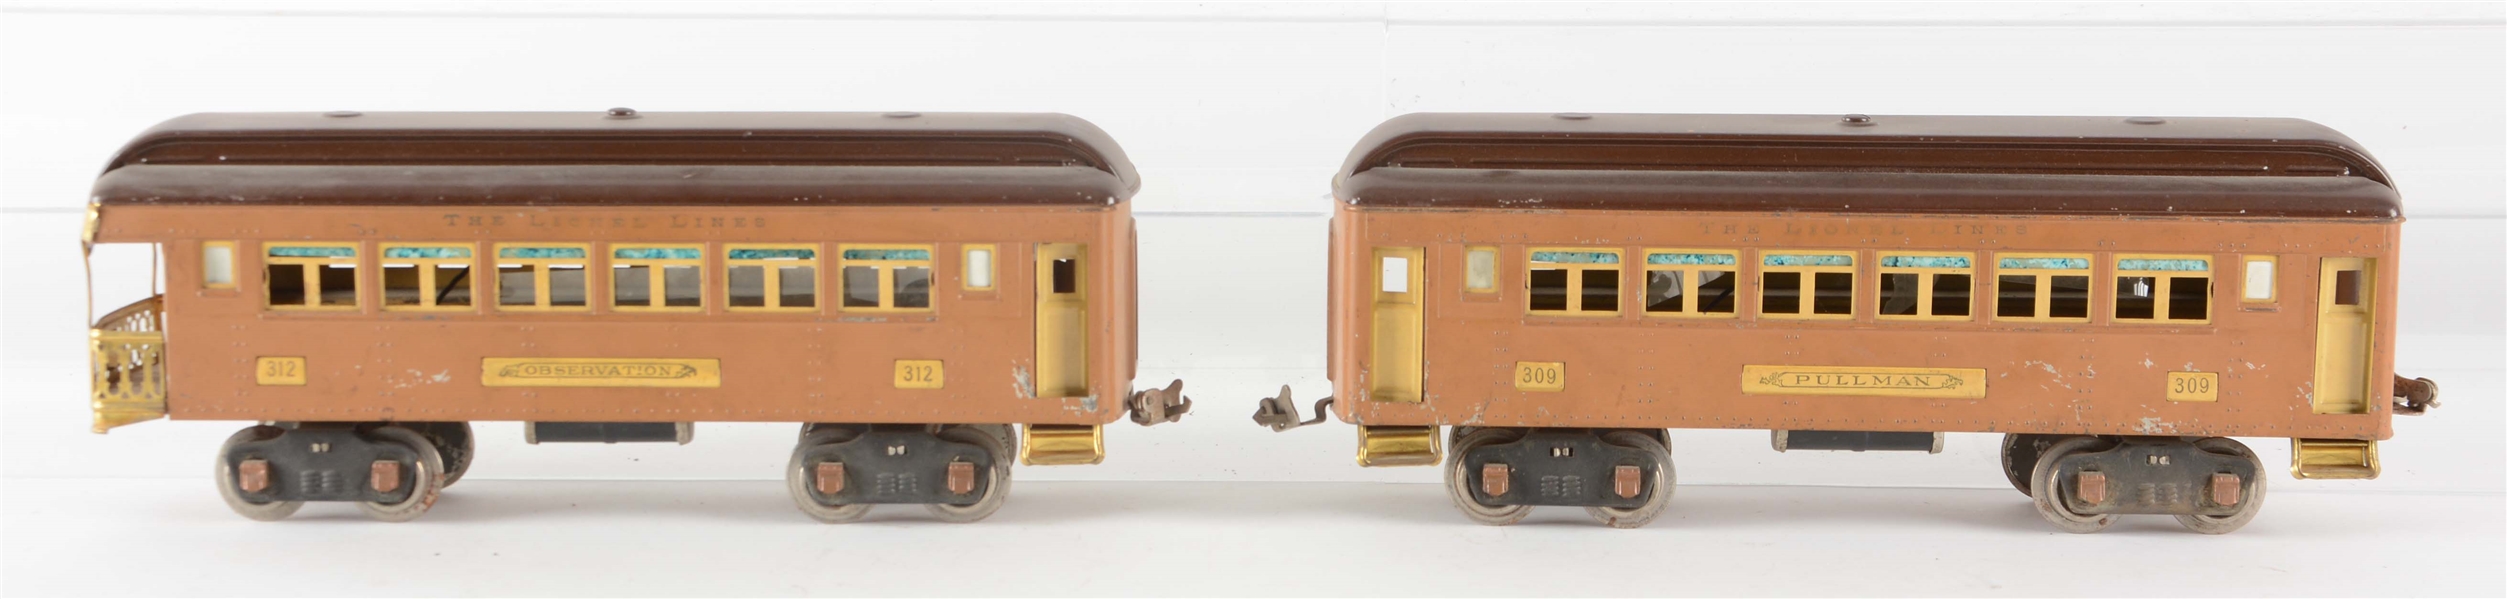 LOT OF 2: LIONEL BABY STATE PASSENGER CARS. 